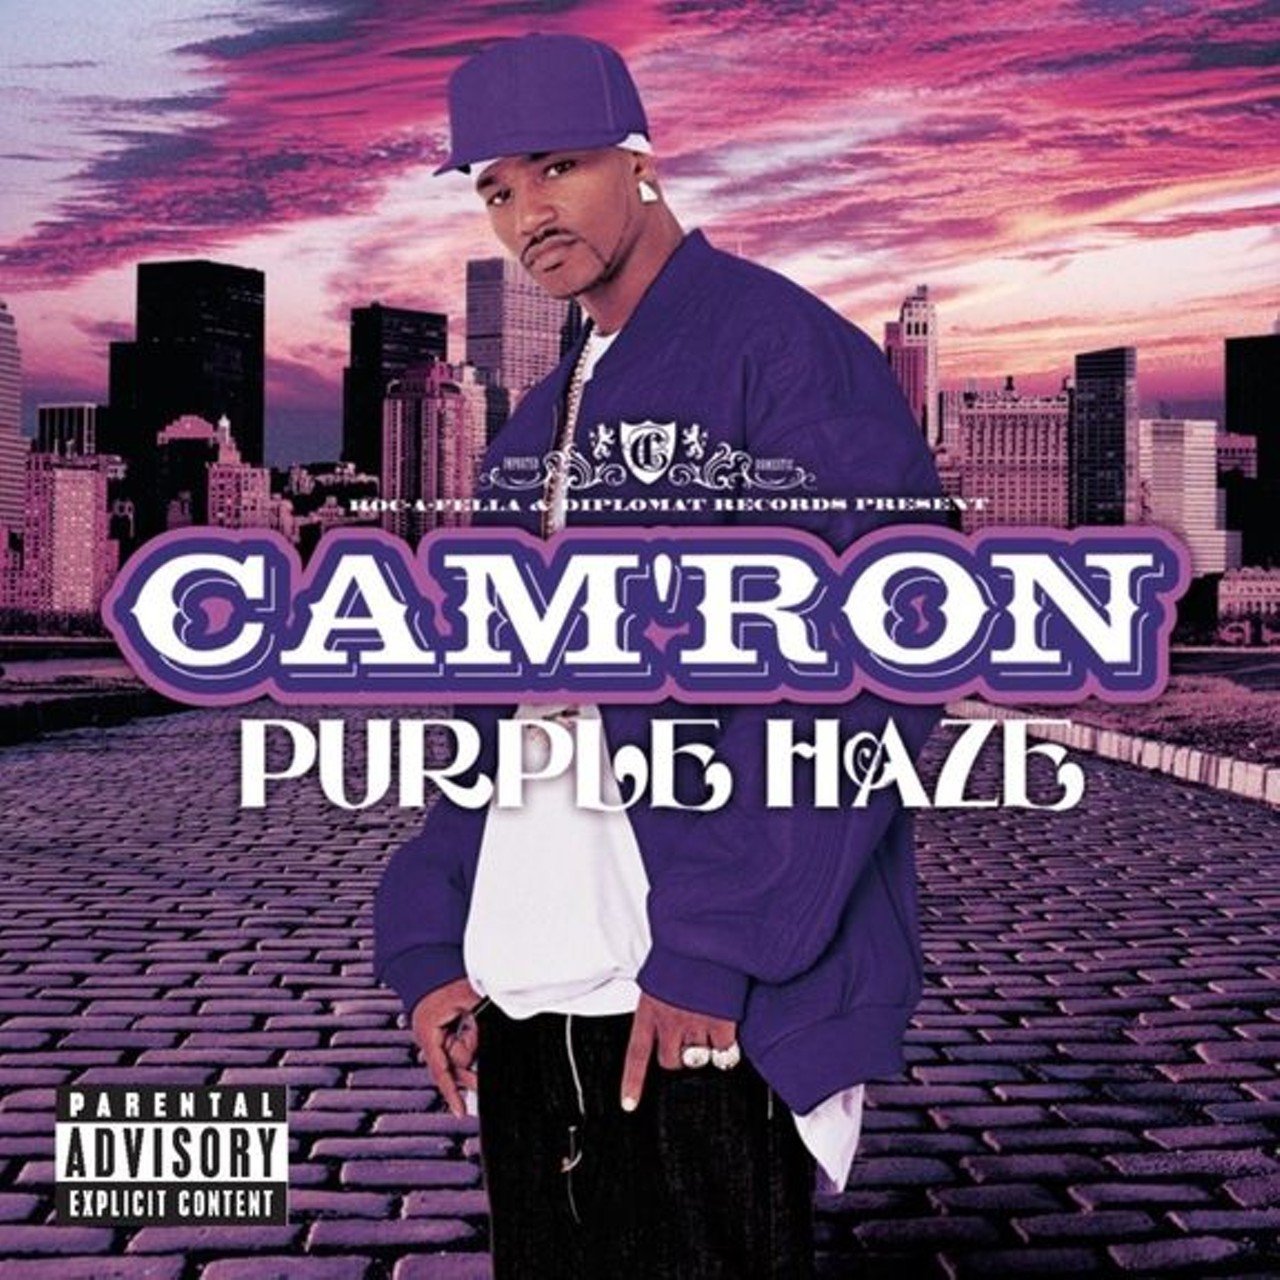 "Down and Out" by Cam'ron
You know what else I do:
Dayton, Youngstown, Cleveland, Cincinnati